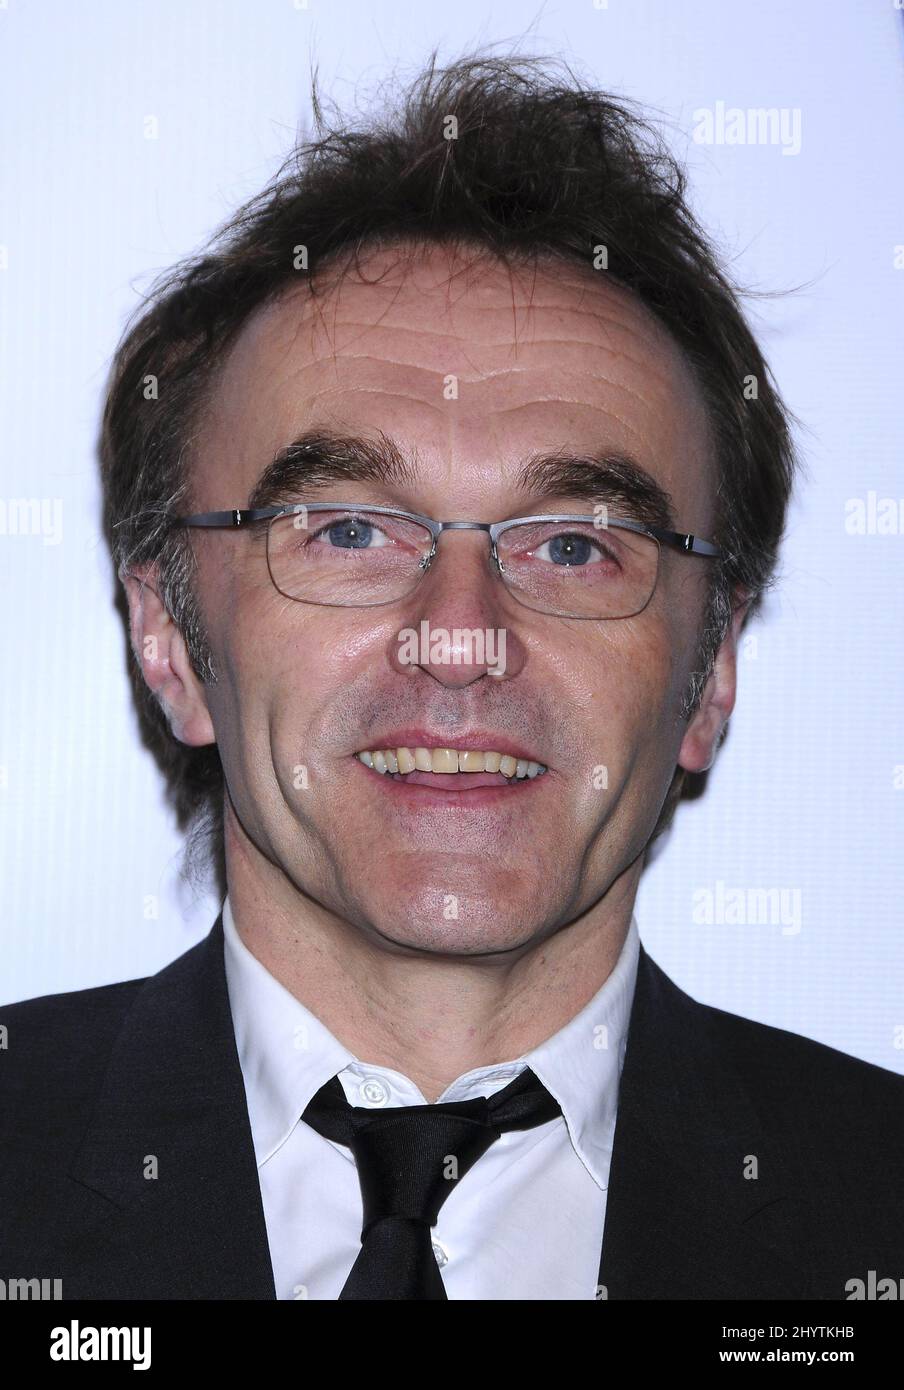 Danny Boyle at the 20th Annual Producers Guild Awards held at the Palladium, Hollywood. Stock Photo